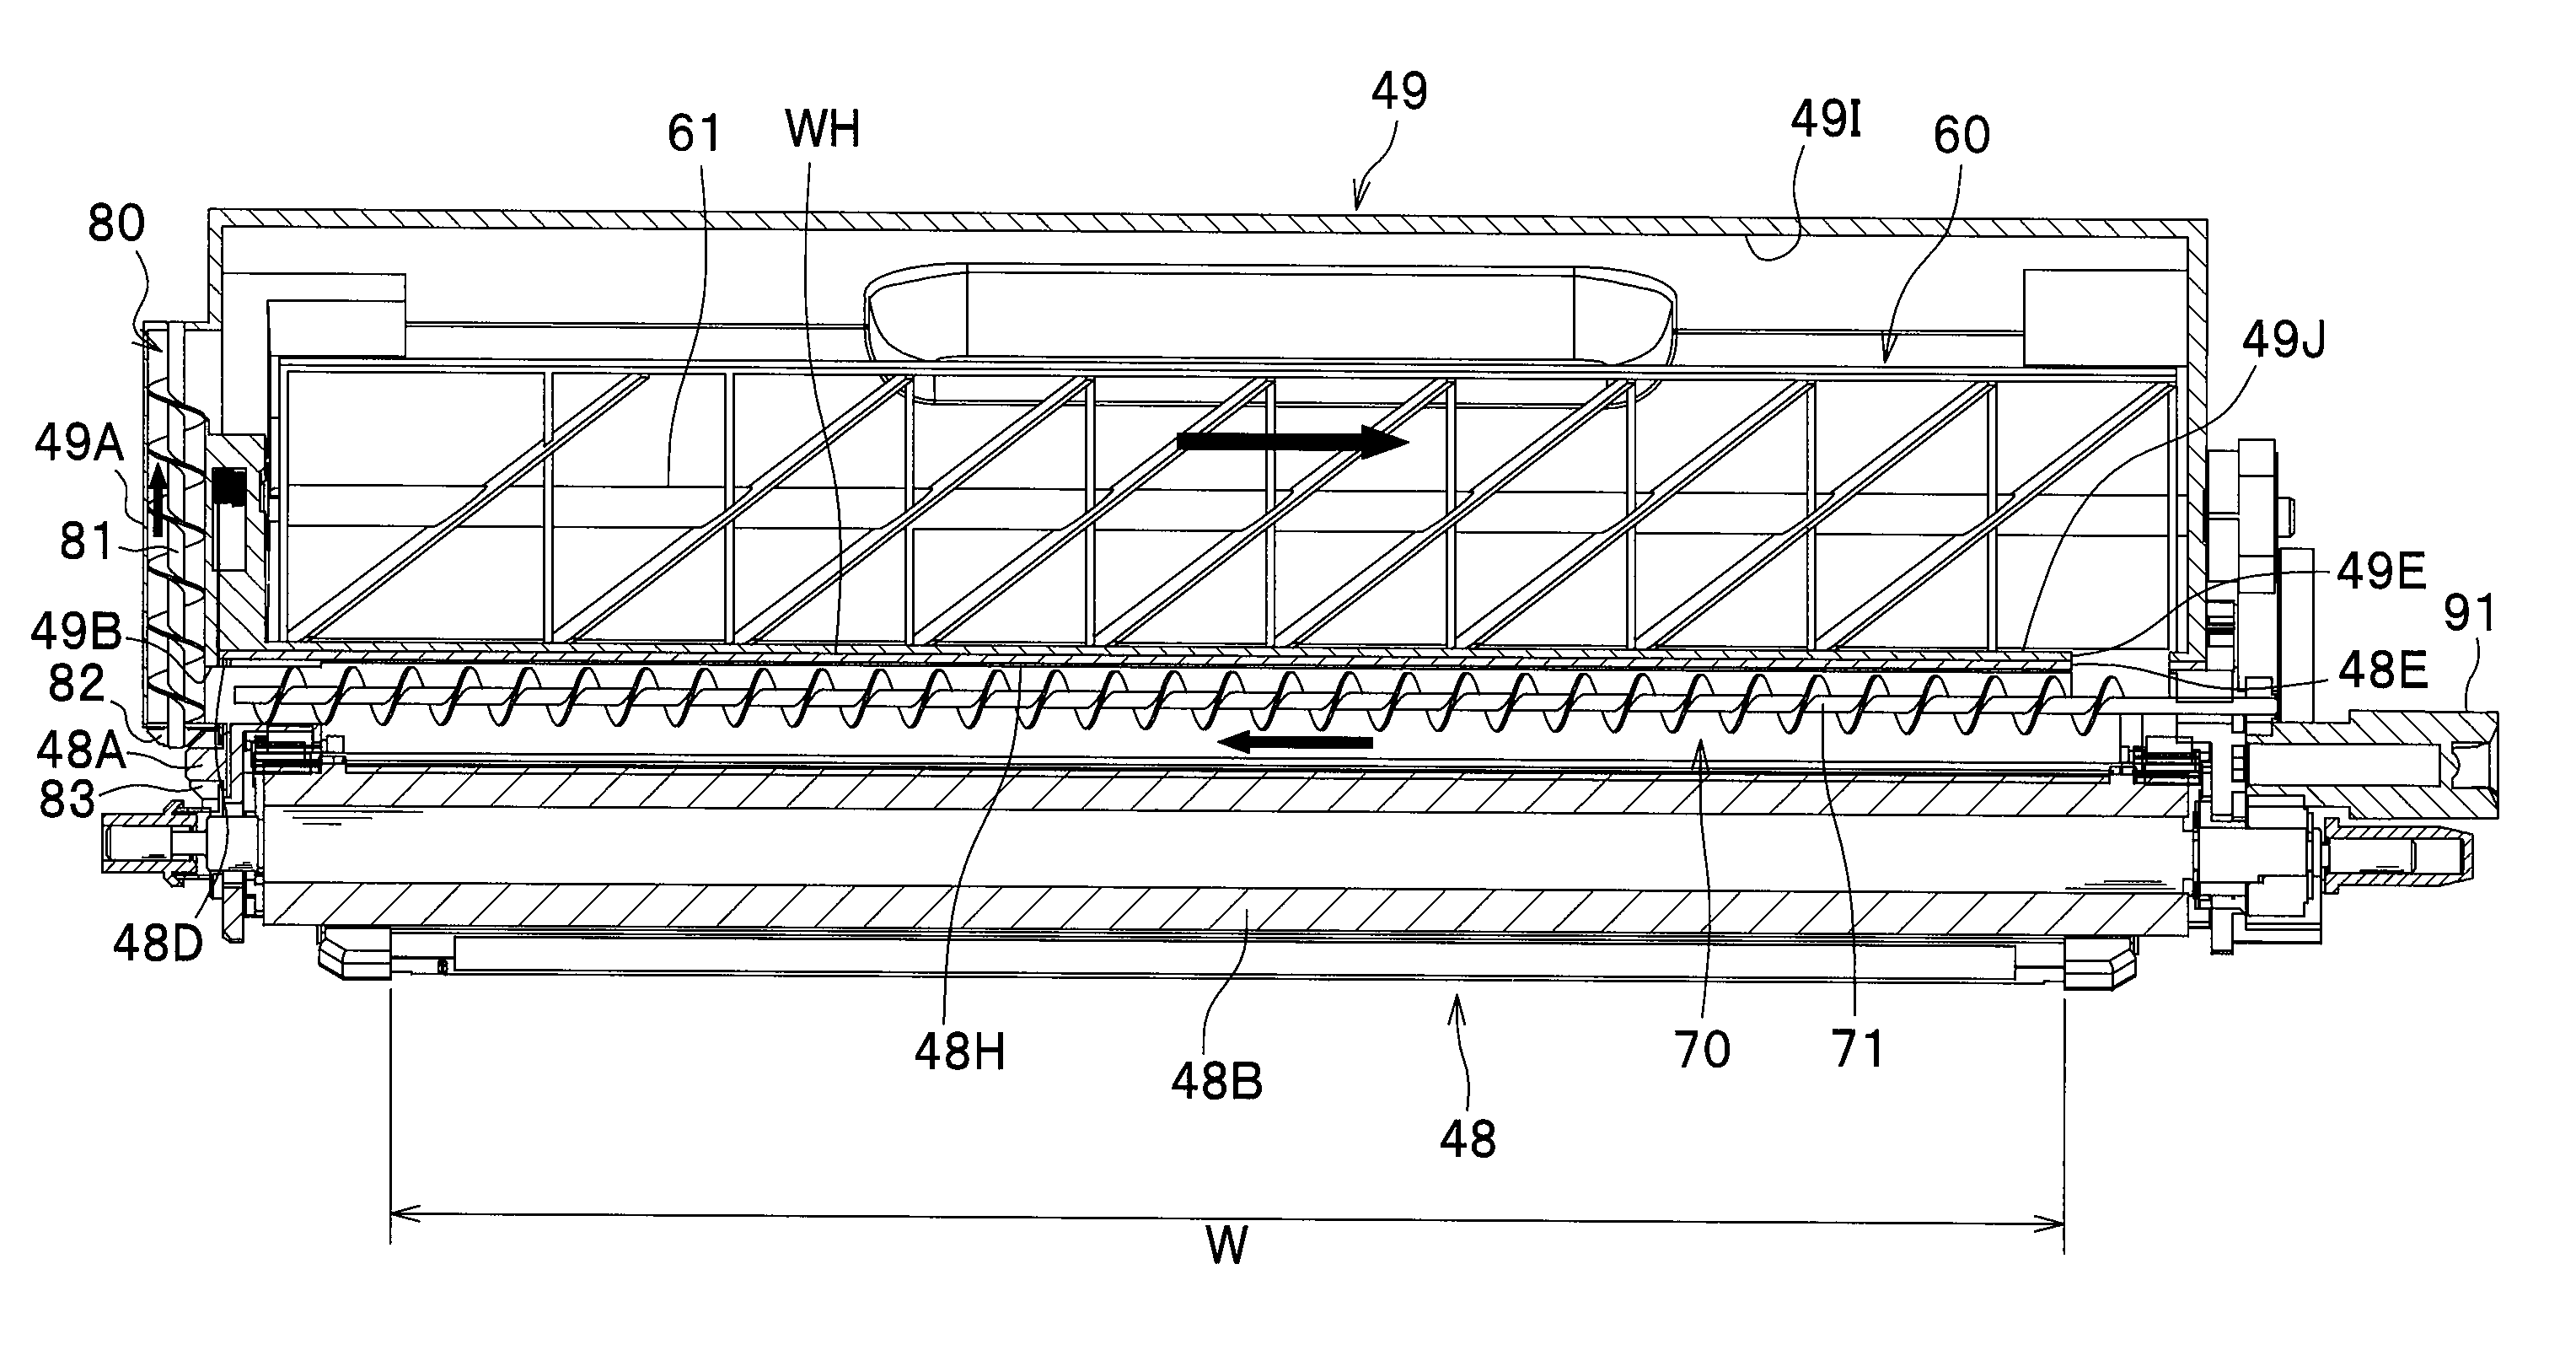 Image forming apparatus with a developer circulation mechanism